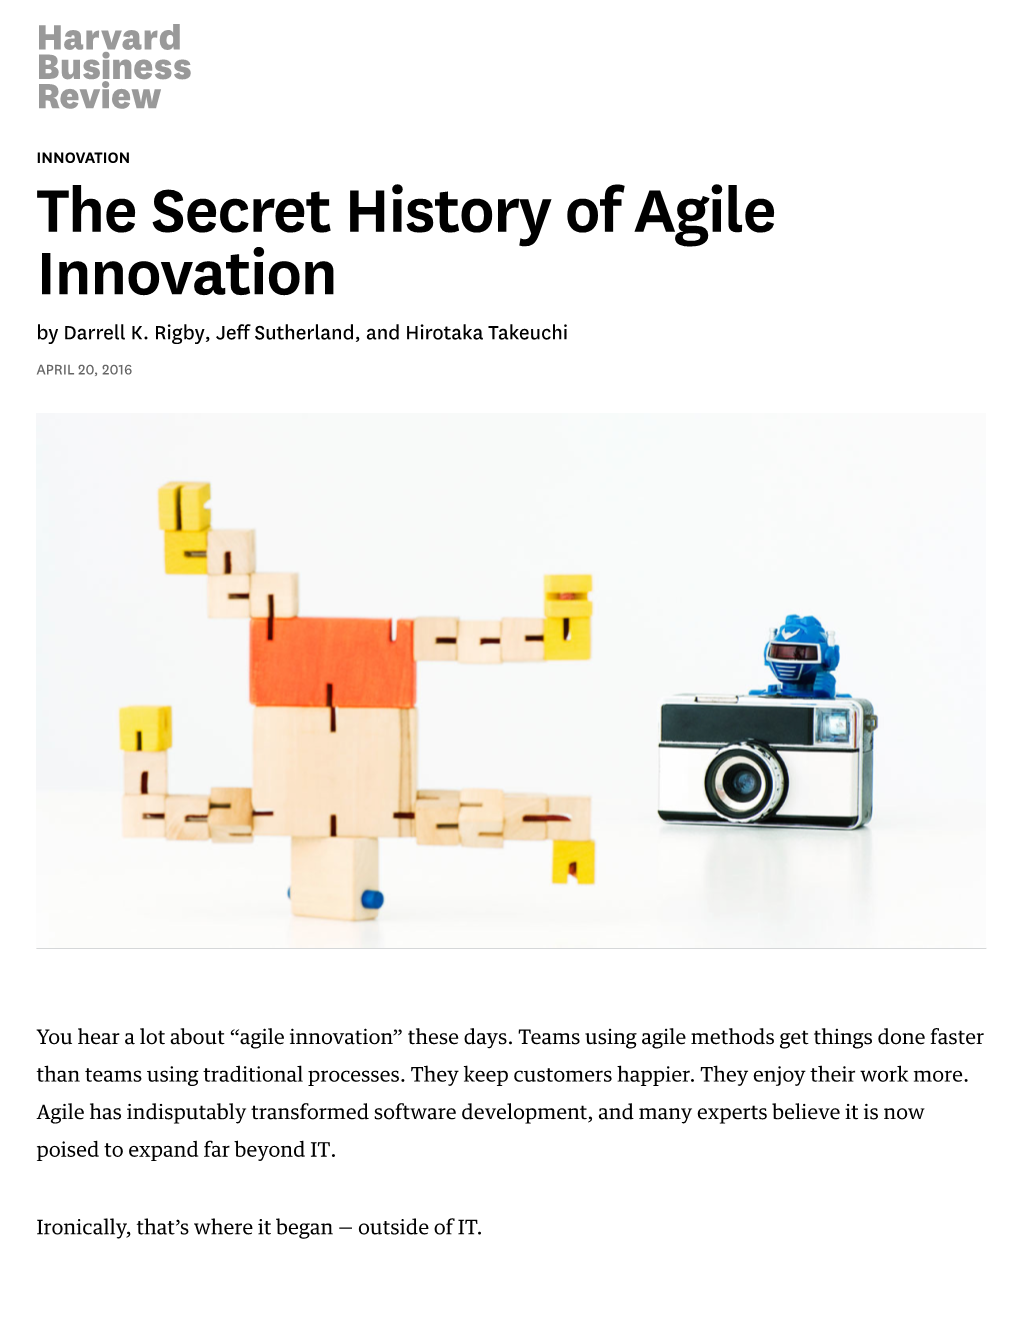 The Secret History of Agile Innovation by Darrell K